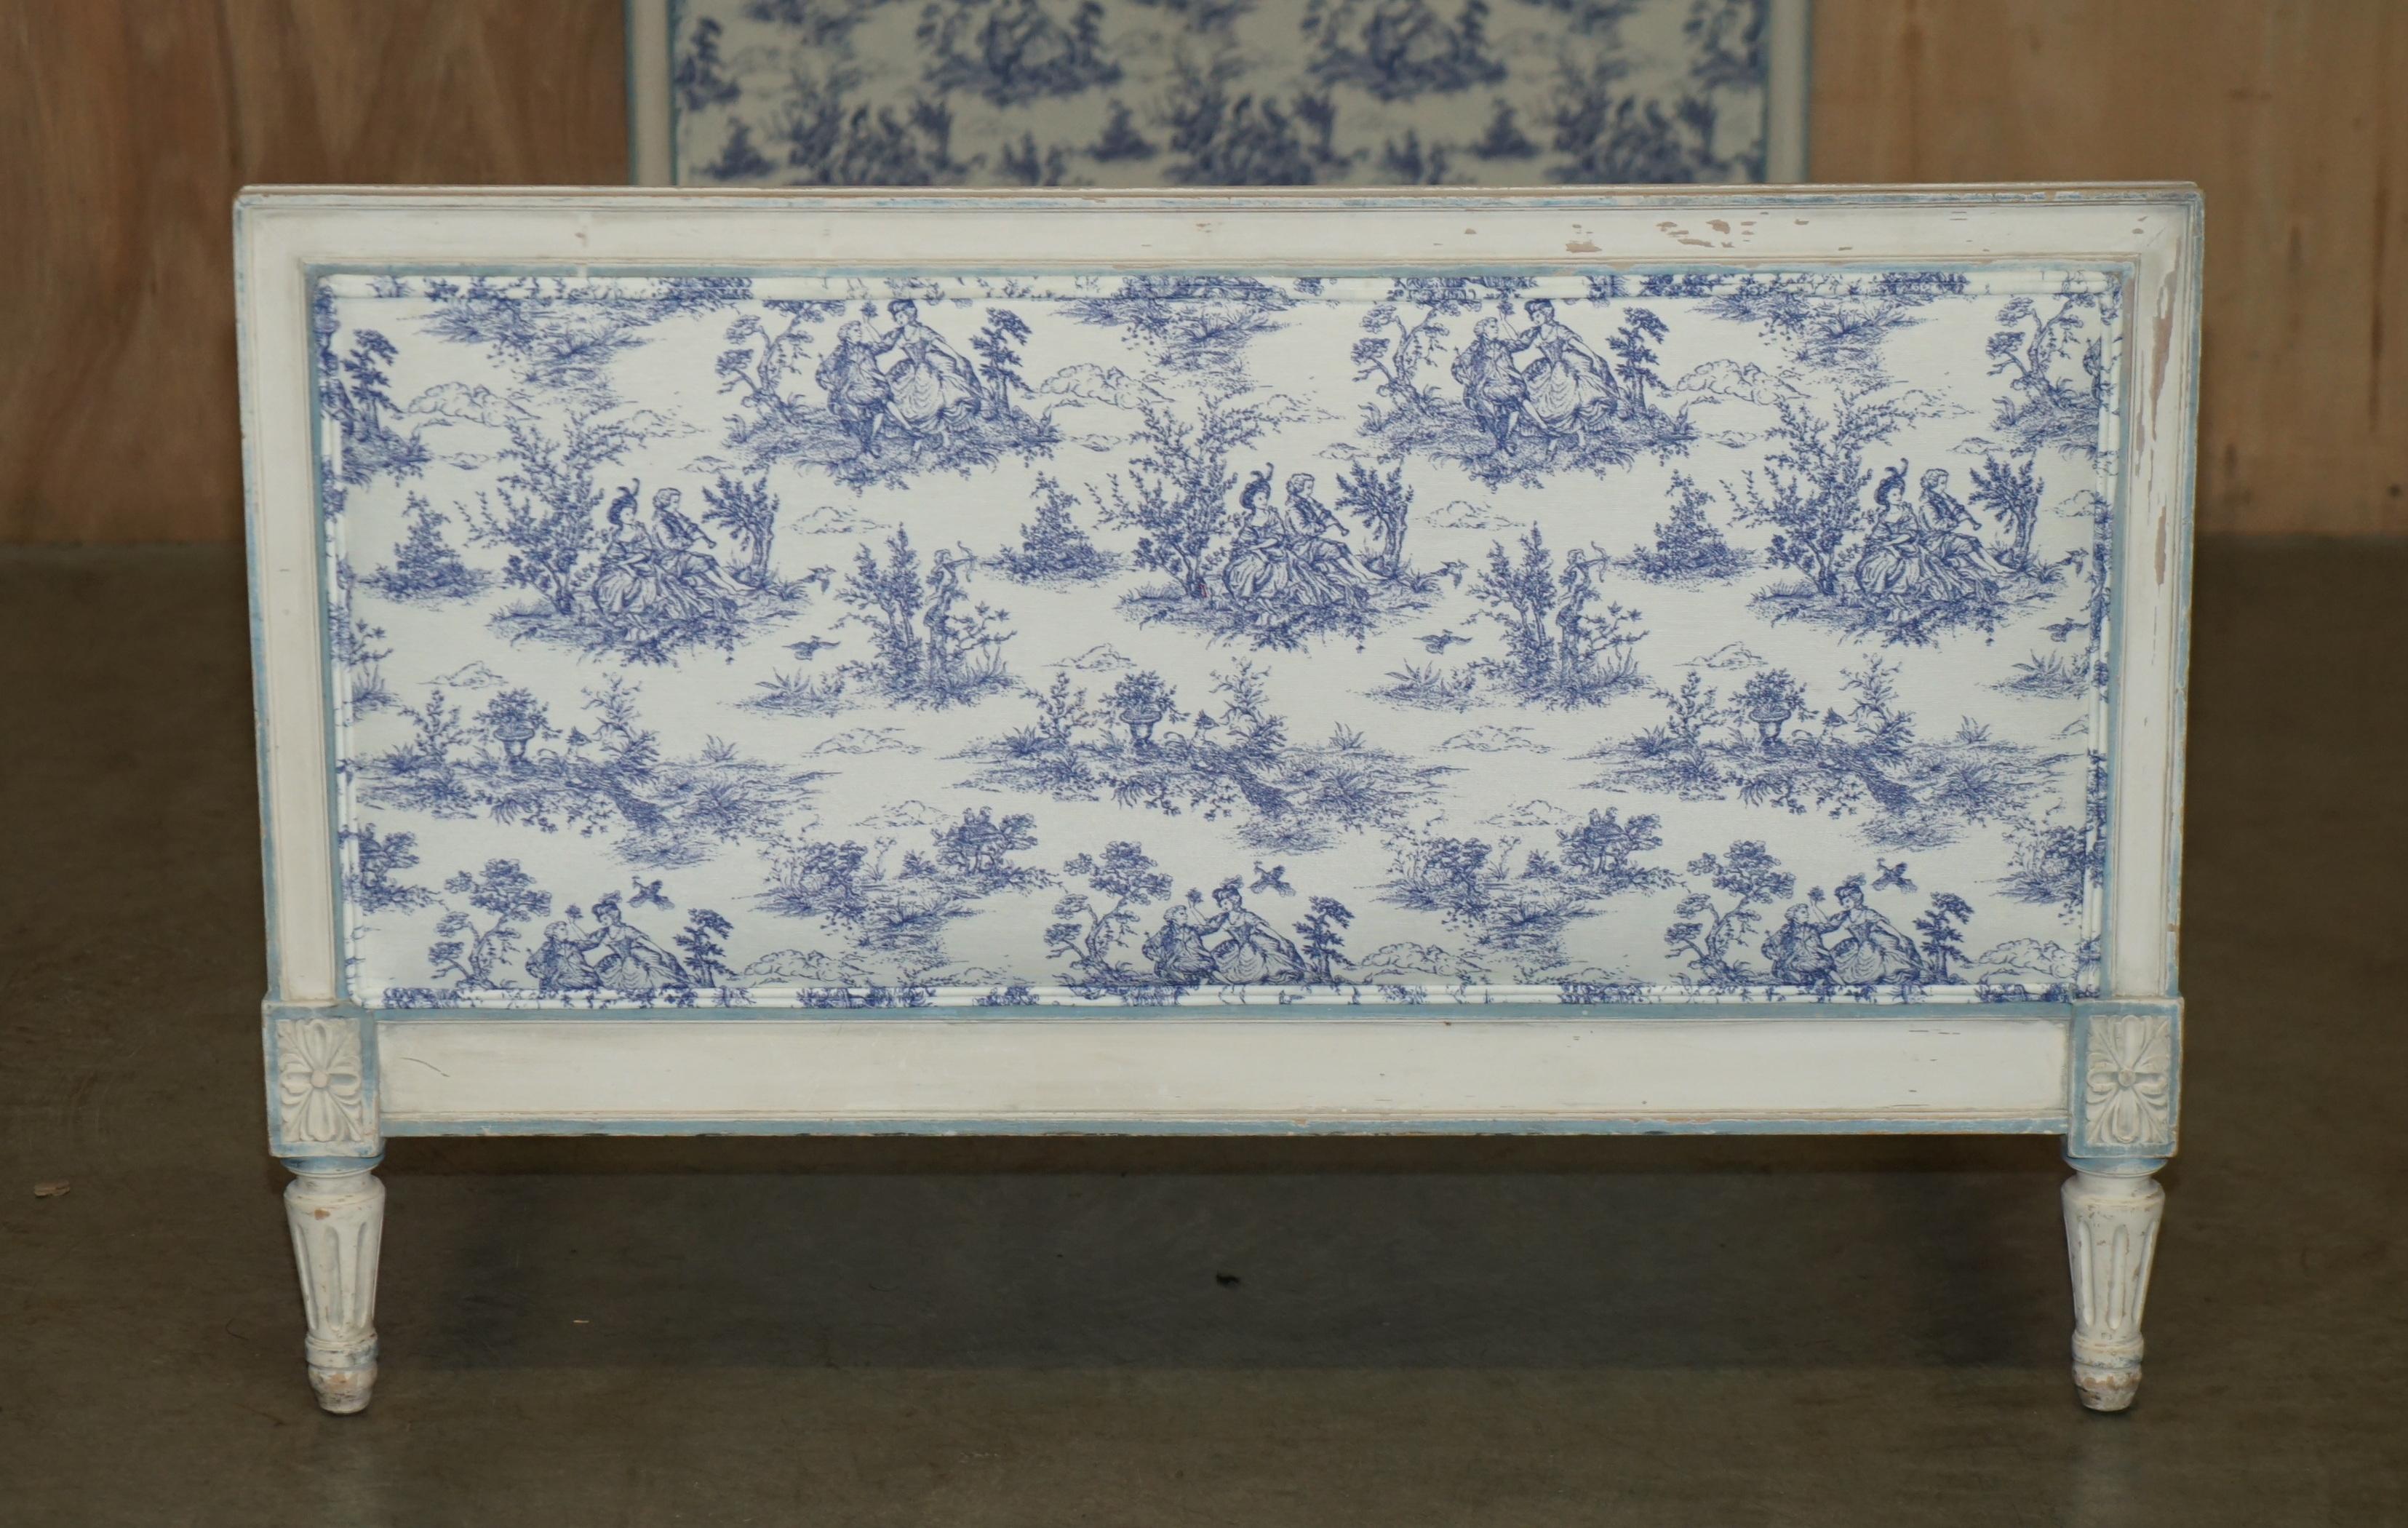 PAIR OF ANTIQUE FRENCH SiNGLE BEDSTEAD FRAMES WITH TOILE DE JOUY UPHOLSTERY For Sale 9